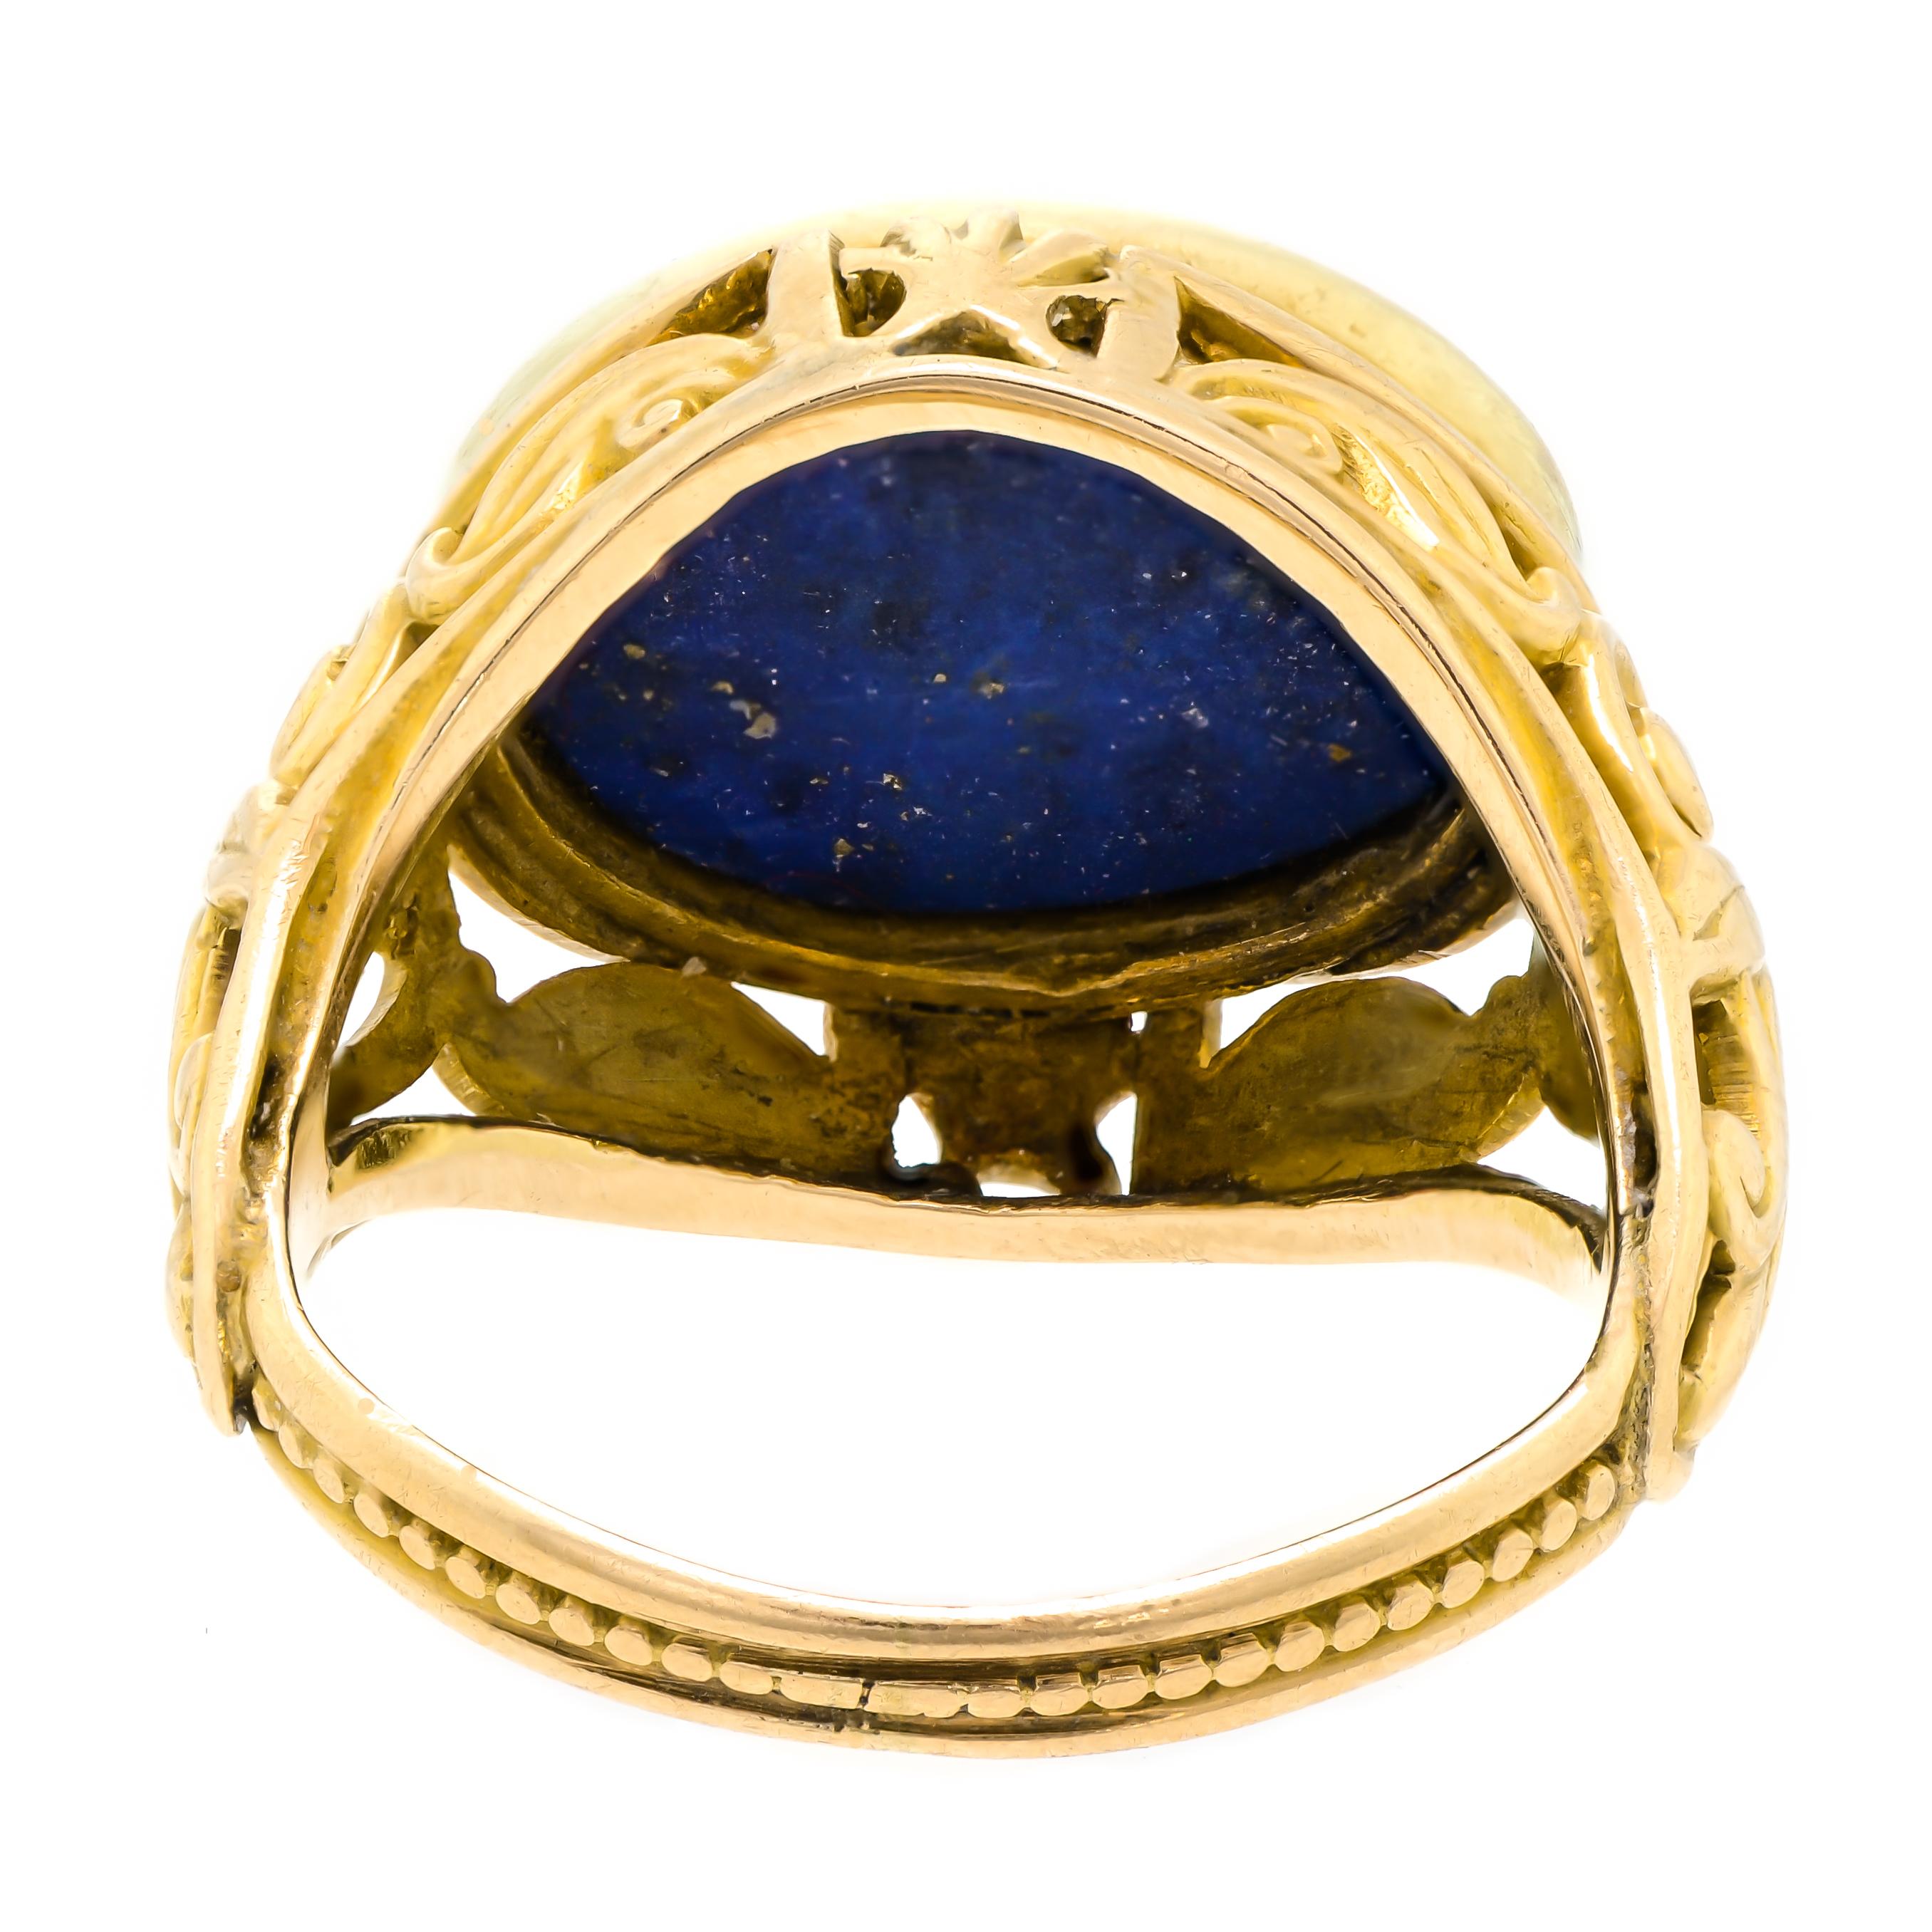 Delightful Victorian Oval Lapis and 14 Karat Yellow Gold Ring For Sale 2